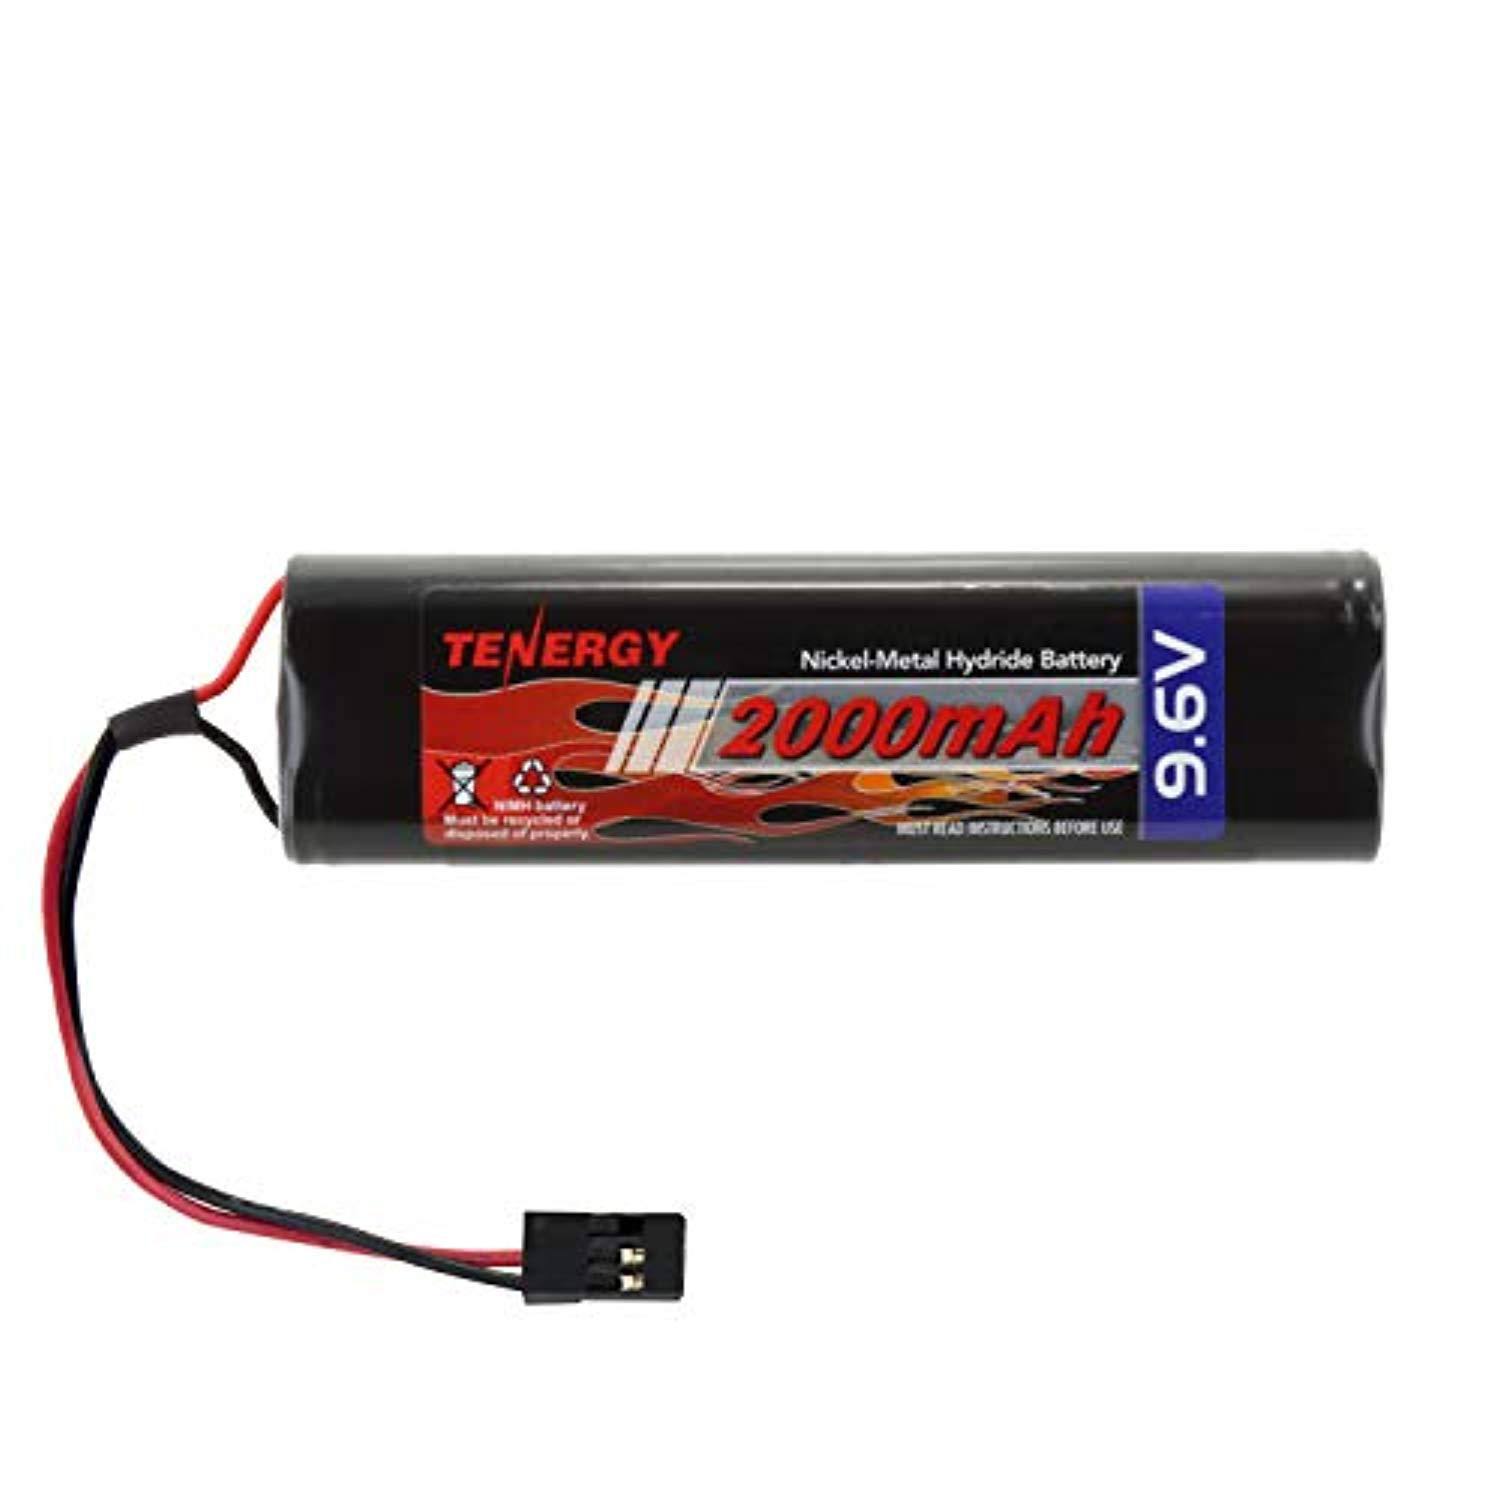 Tenergy NiMH Receiver Battery Pack with Hitec Connectors 9.6V 2000mAh